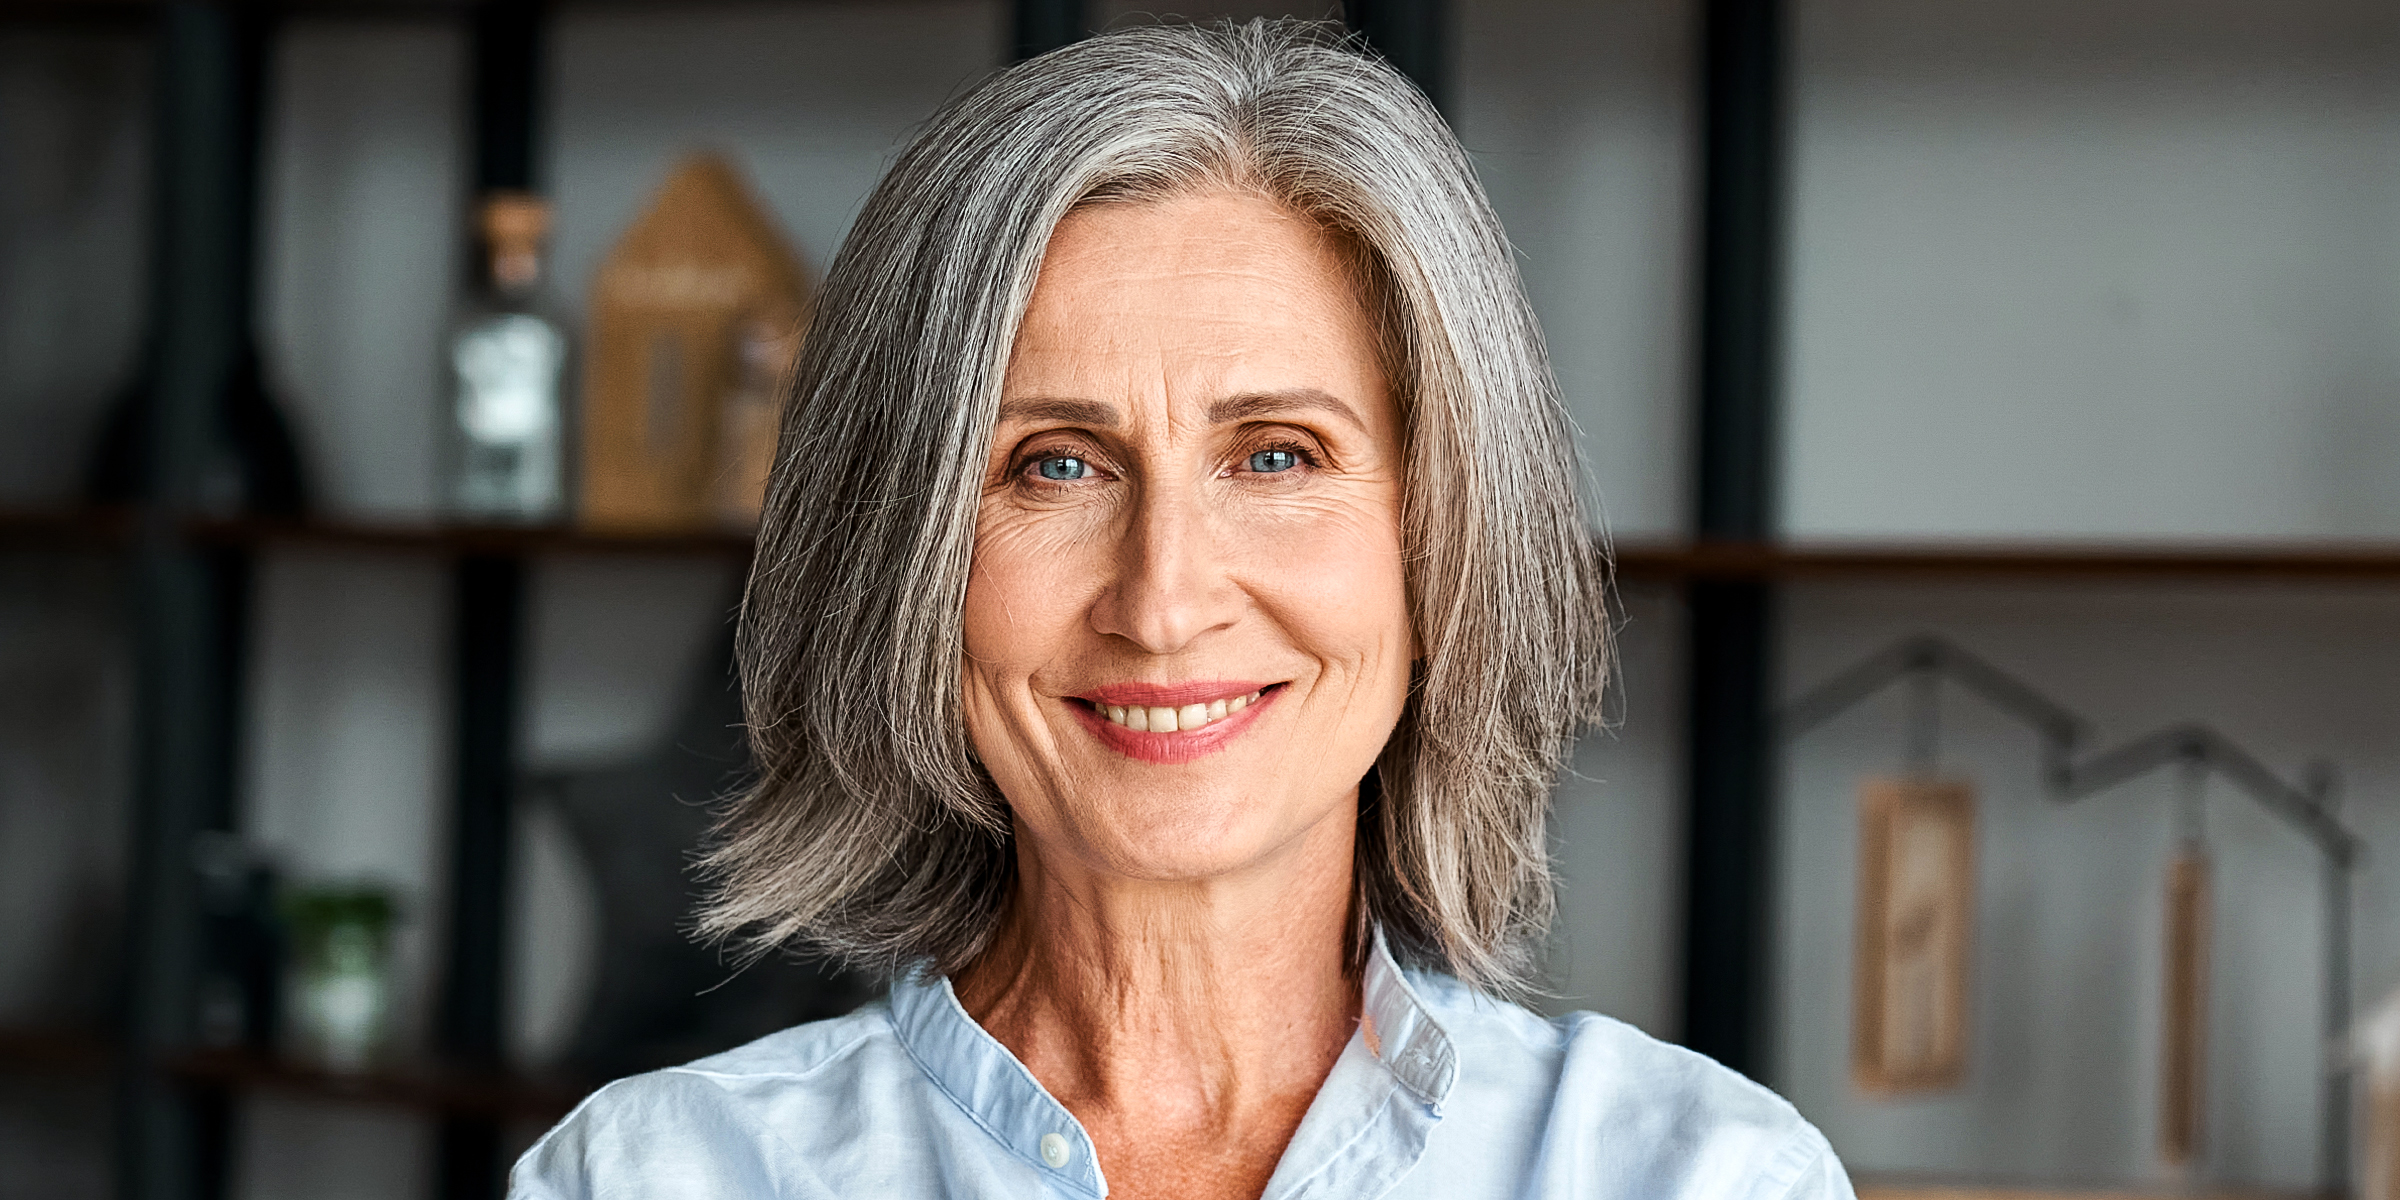 A woman with gray hair | Source: Shutterstock